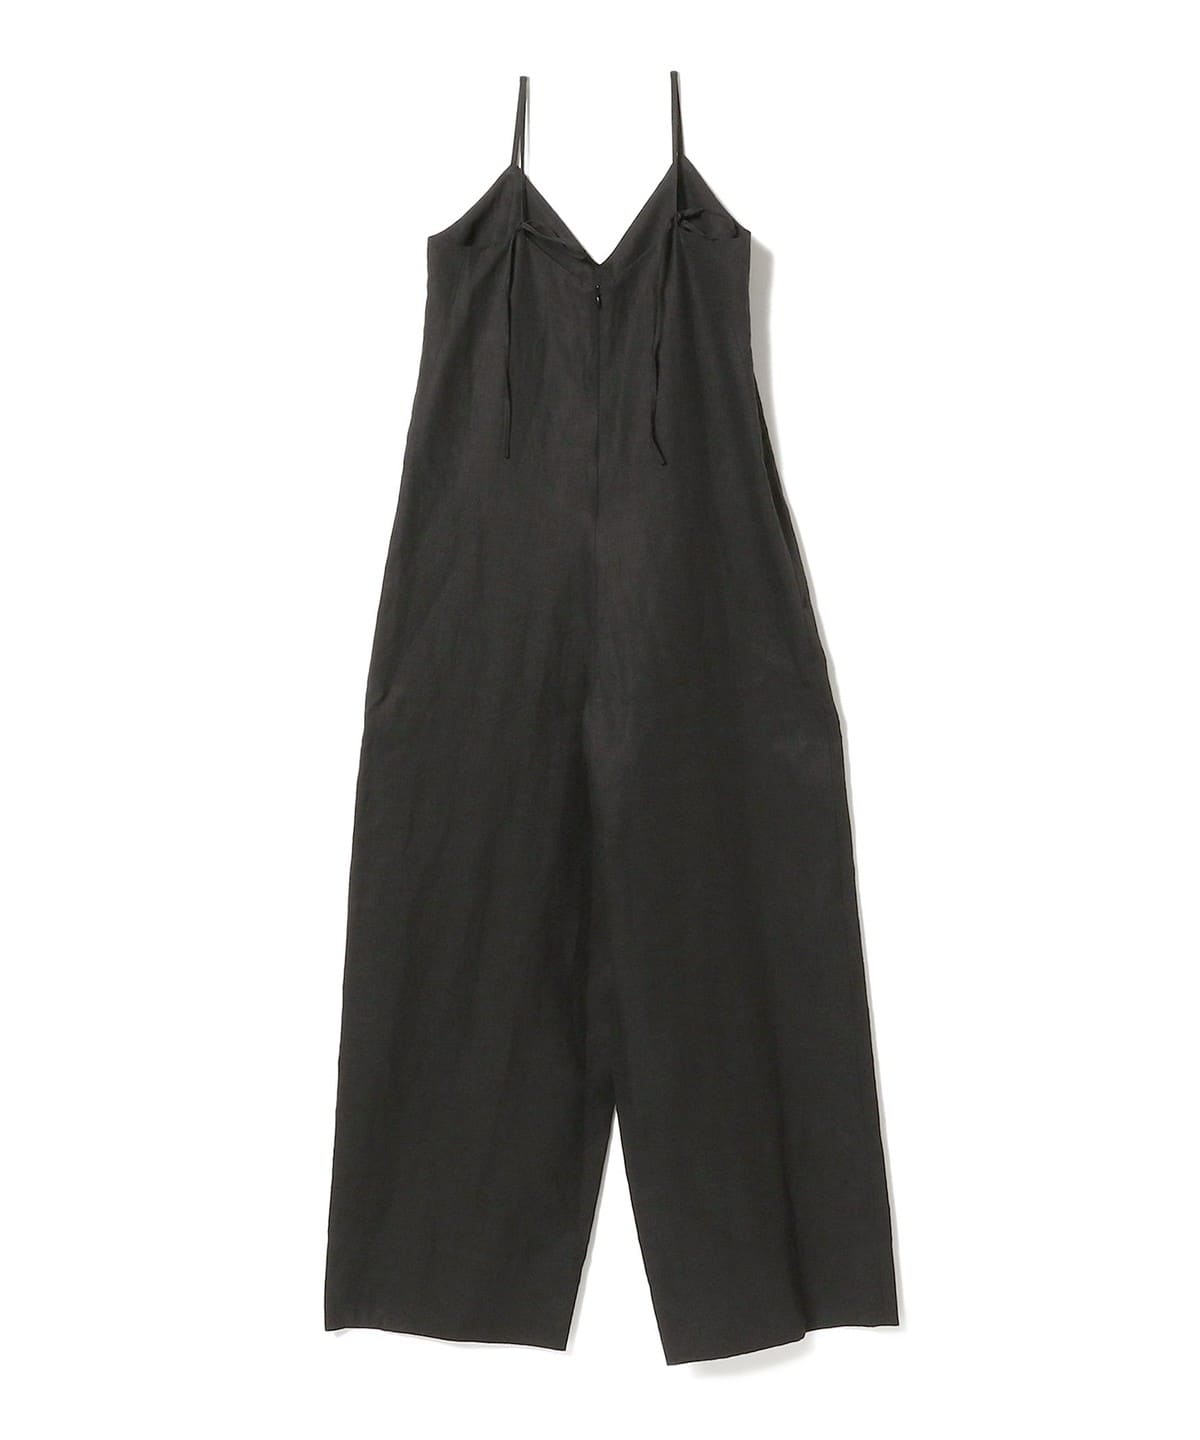 Demi-Luxe BEAMS Demi-Luxe BEAMS Outlet] Lachement / Linen overalls 